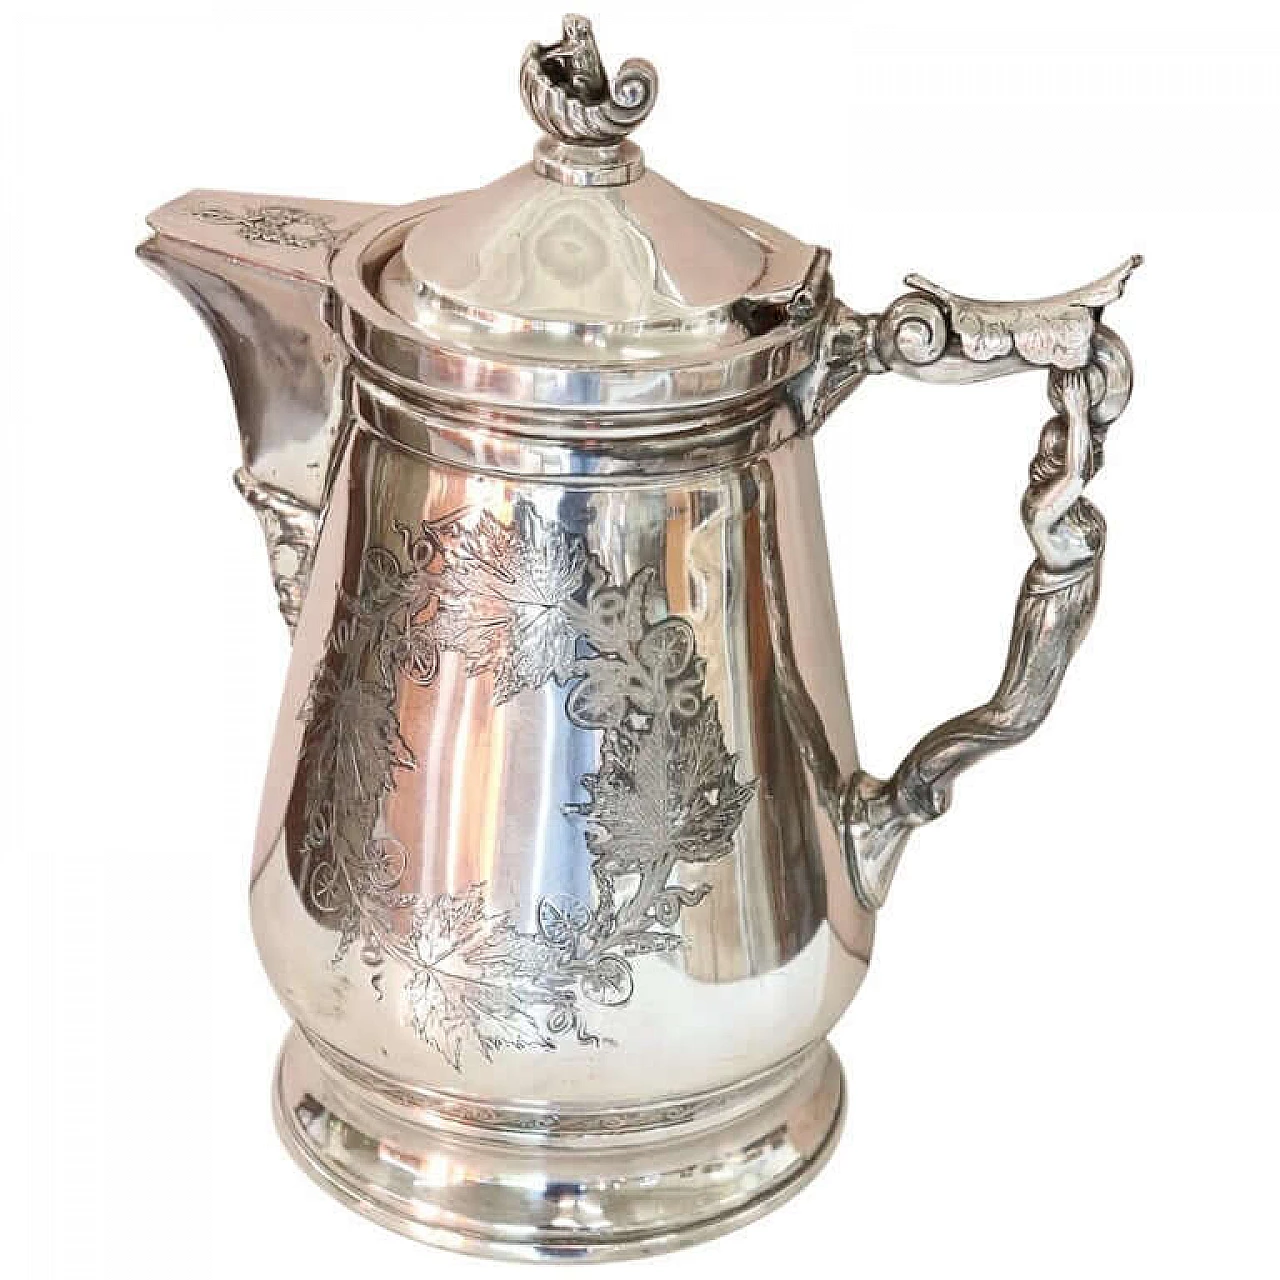 Antique silver plated pitcher by Wilcox, 1868 1067046